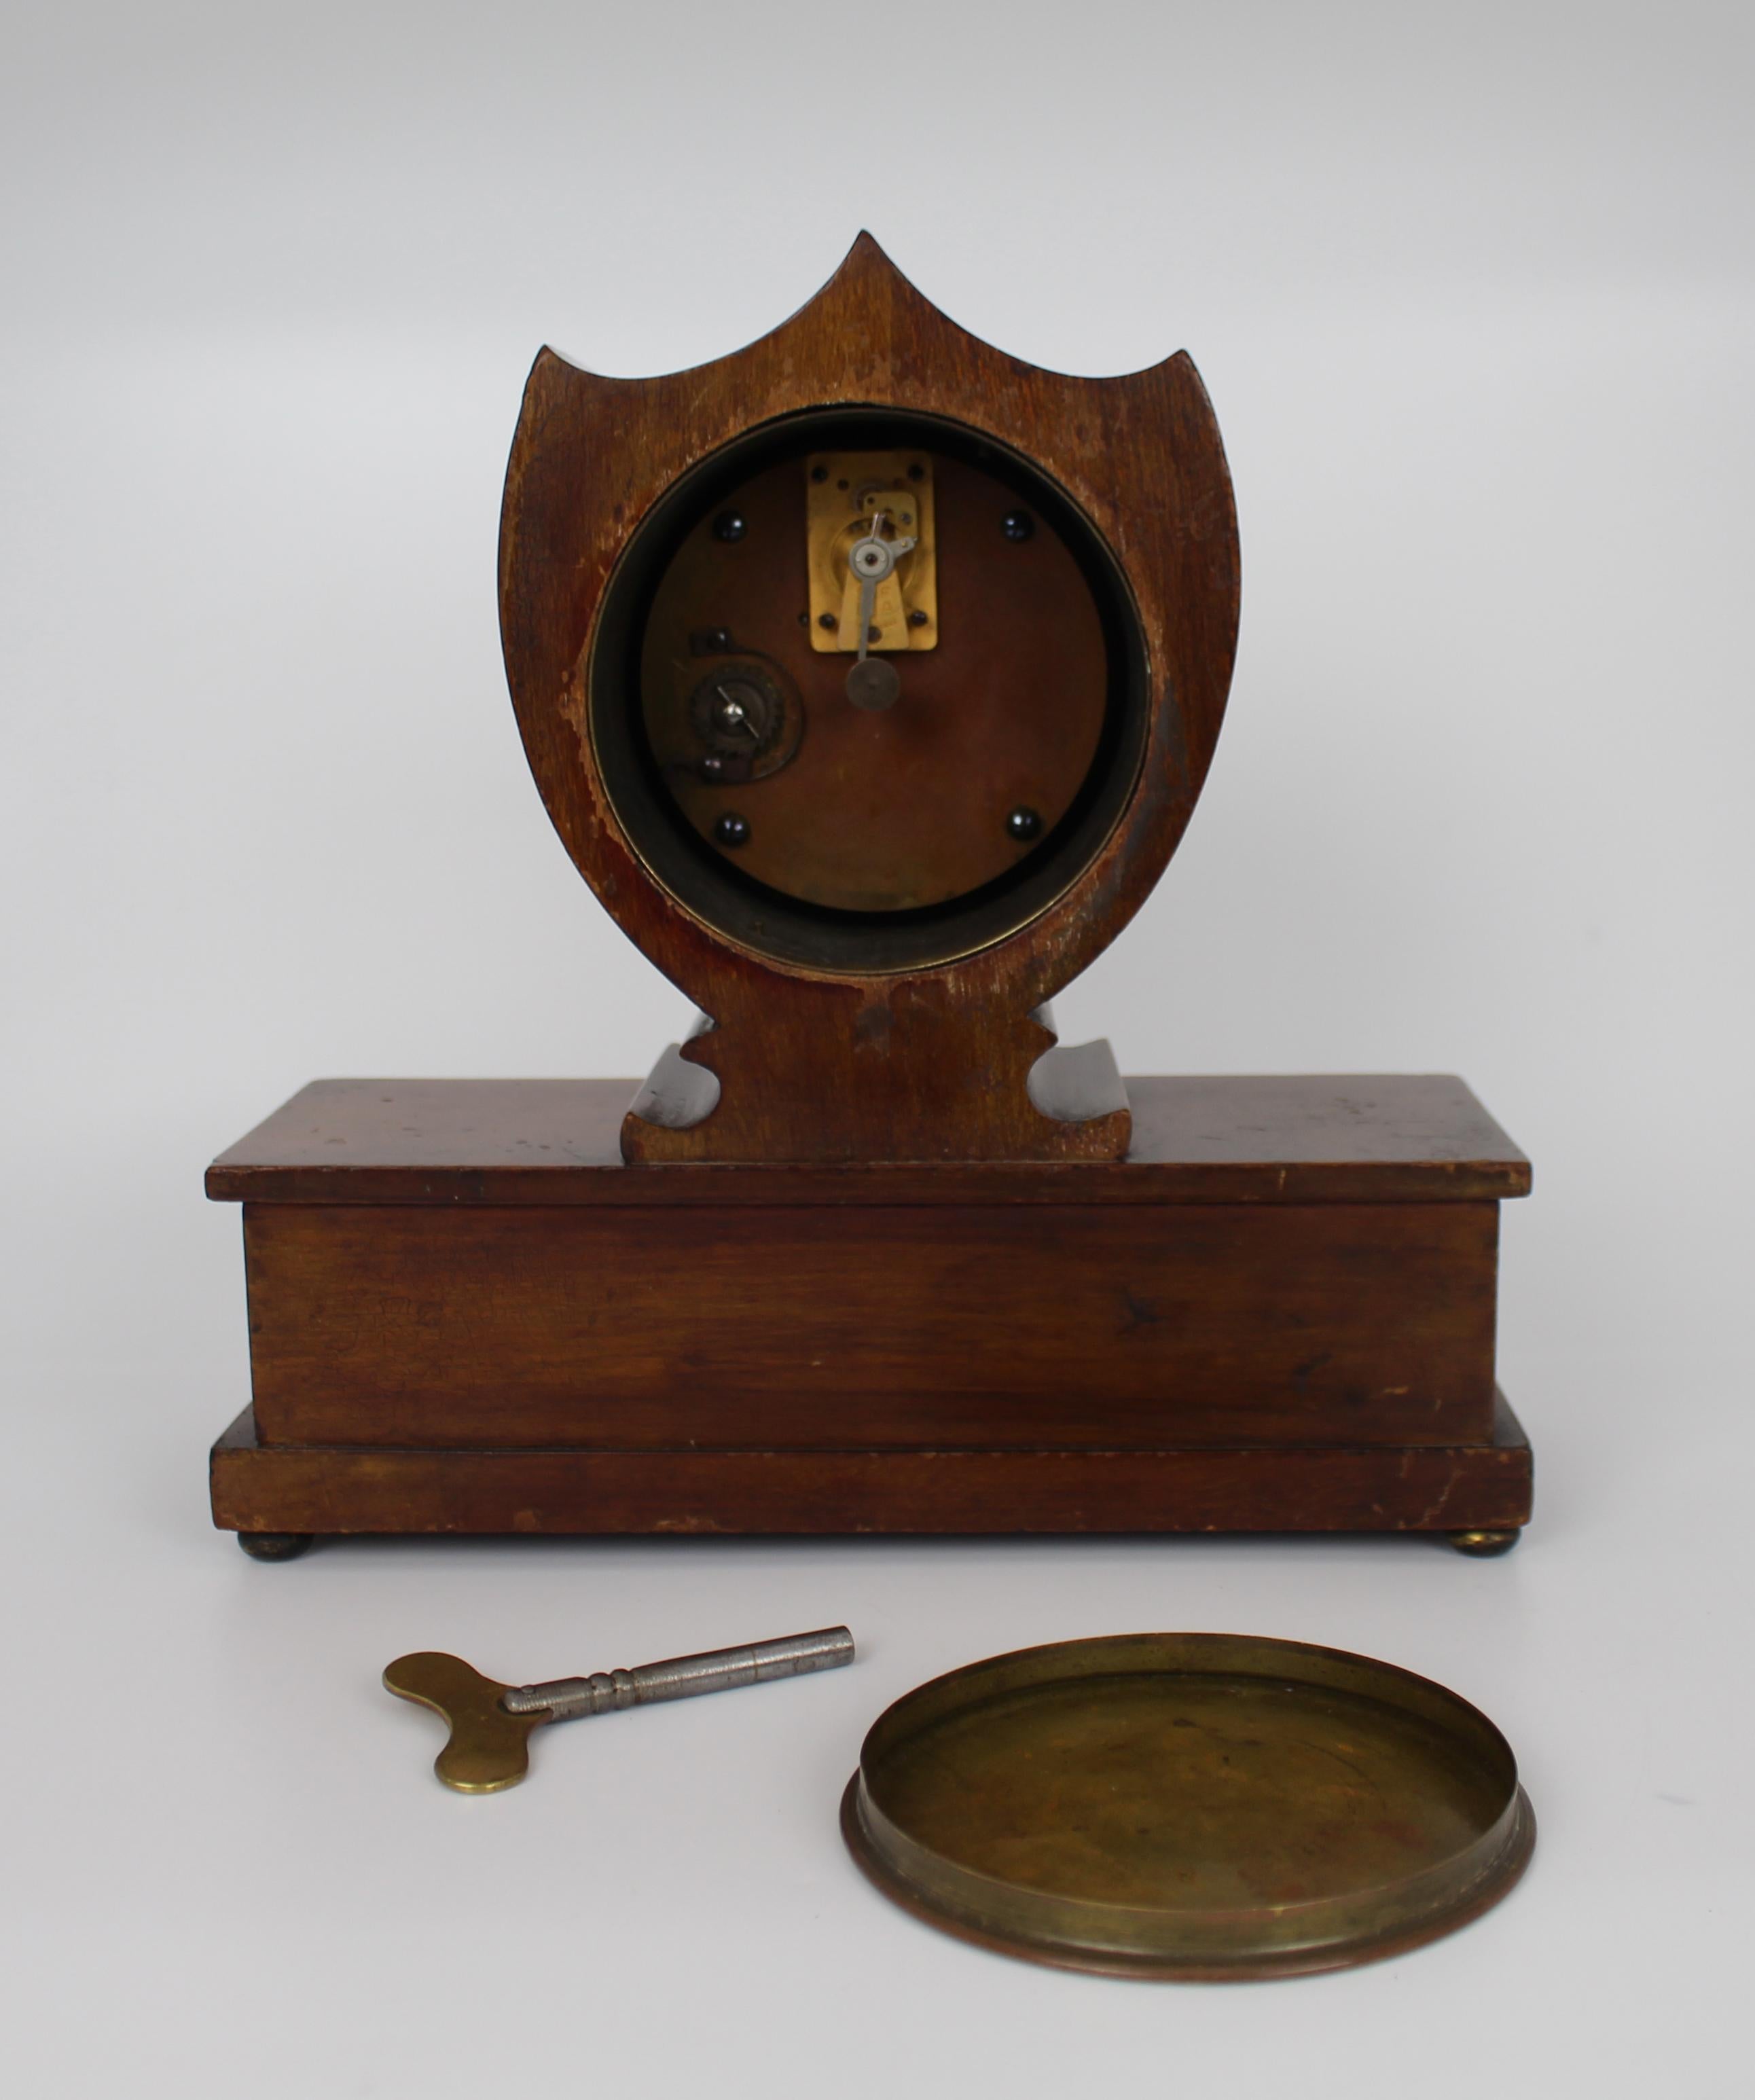 Elegant Inlaid Mahogany Mantle Clock by Wray, Son & Perry c.1900 For Sale 4